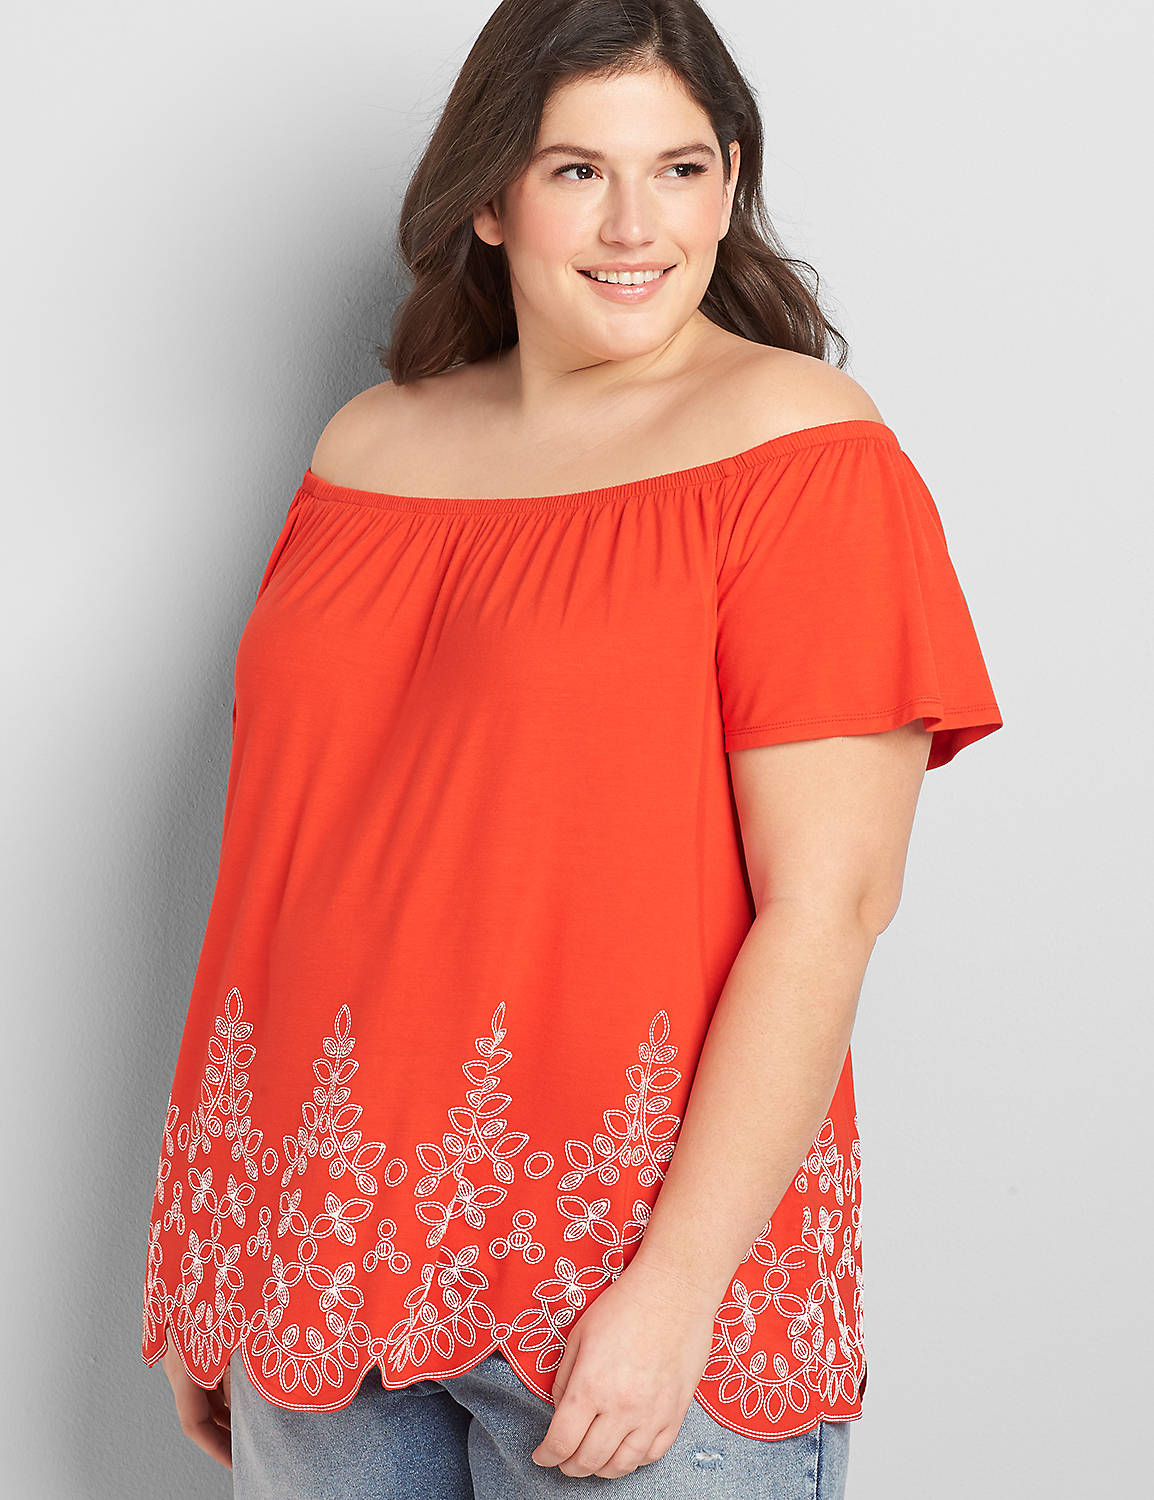 Off-The-Shoulder Swing Top With Printed Hem Product Image 1